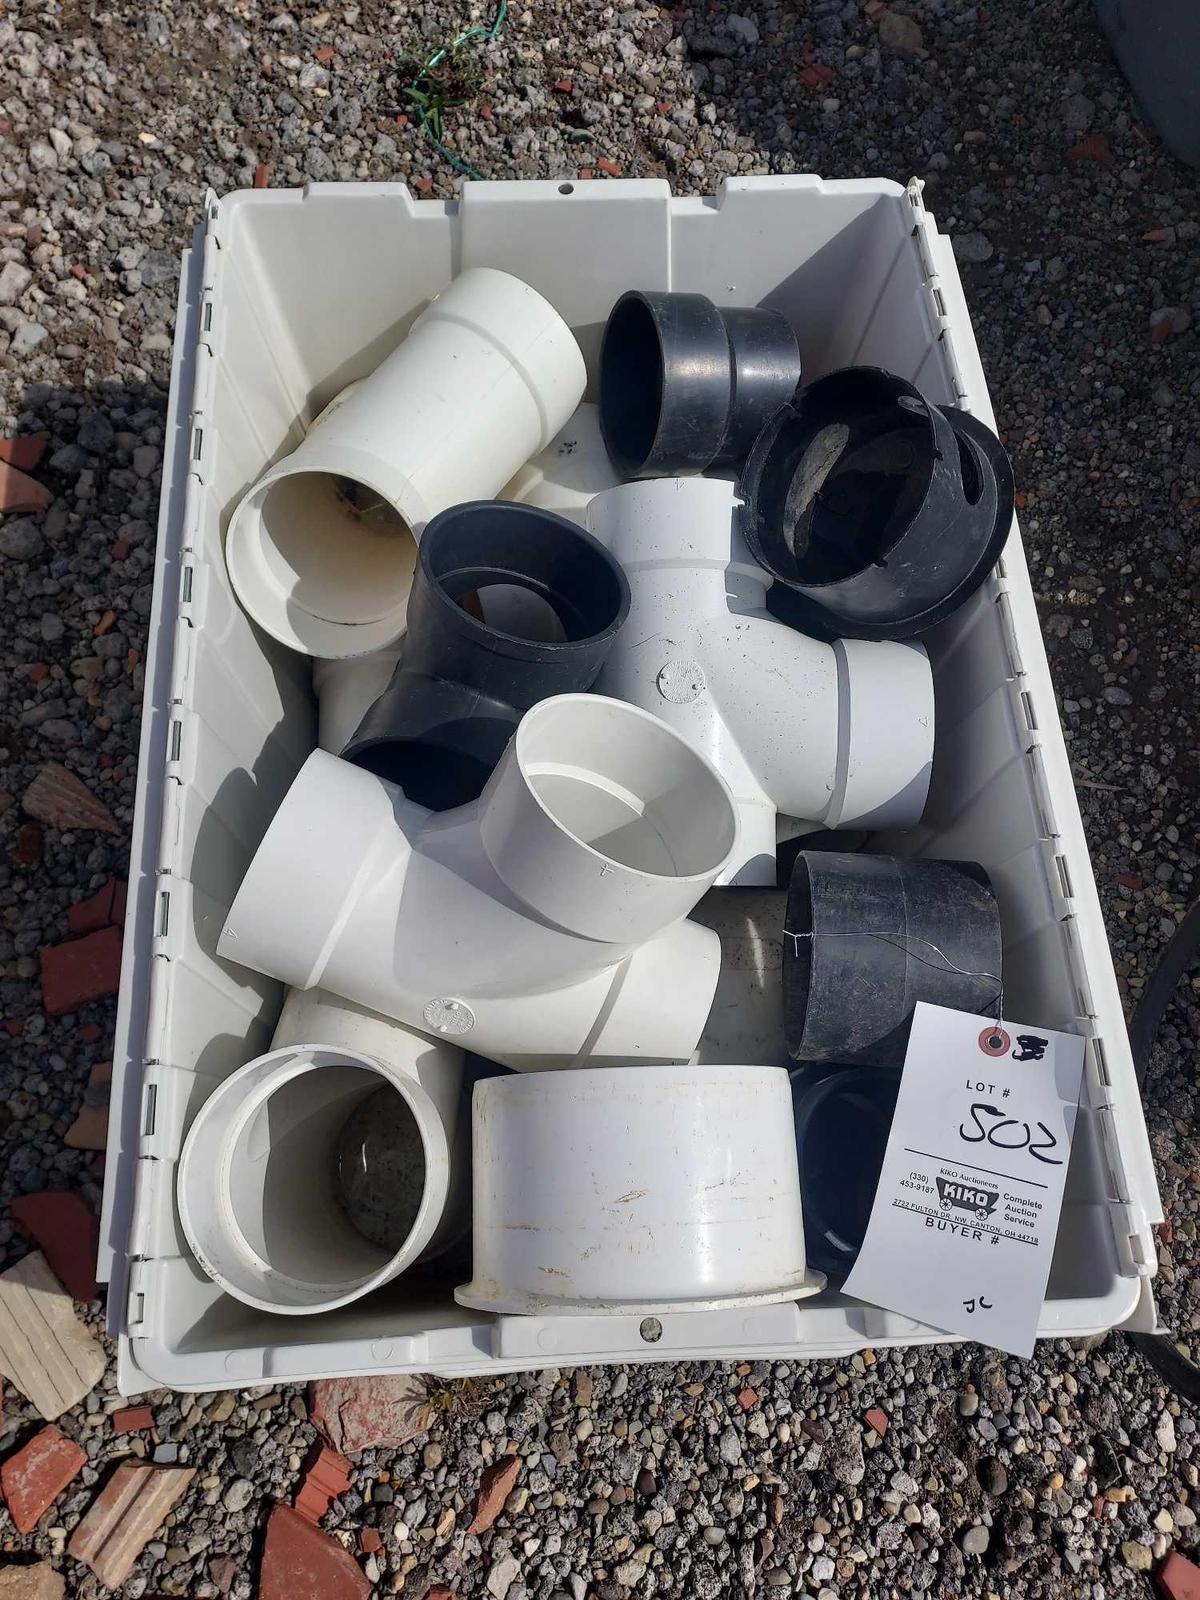 Box of PVC Pipe Pieces